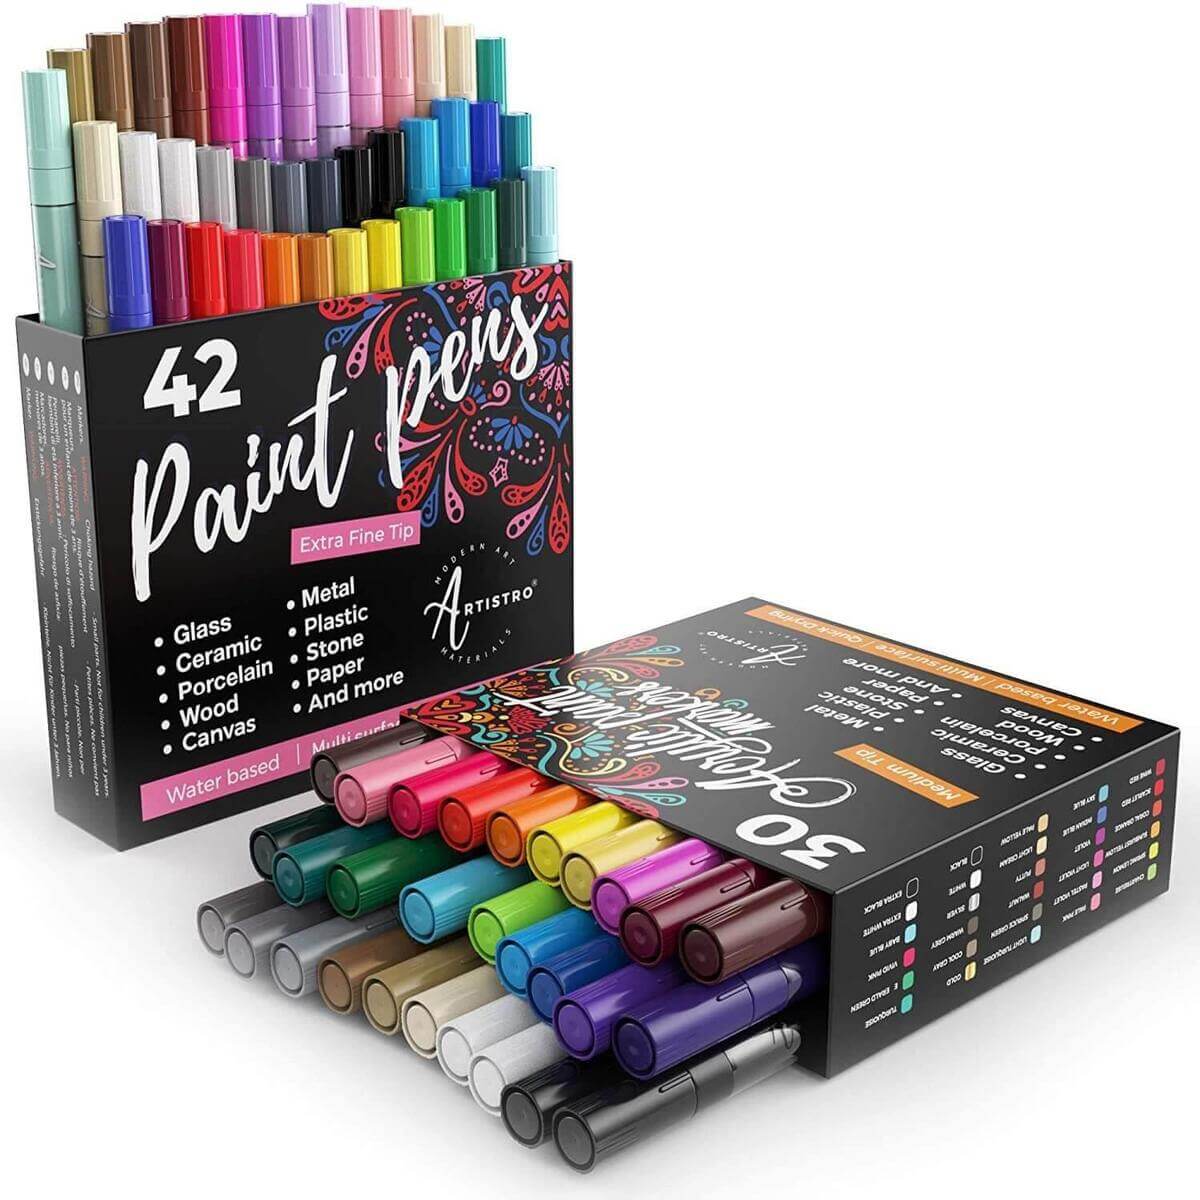 Wholesale Acrylic Paint Refillable Markers For Advertising, Art, And  Drawing On Wood, Canvas, Stone, Glass, Ceramic Surfaces From Home_office,  $0.26